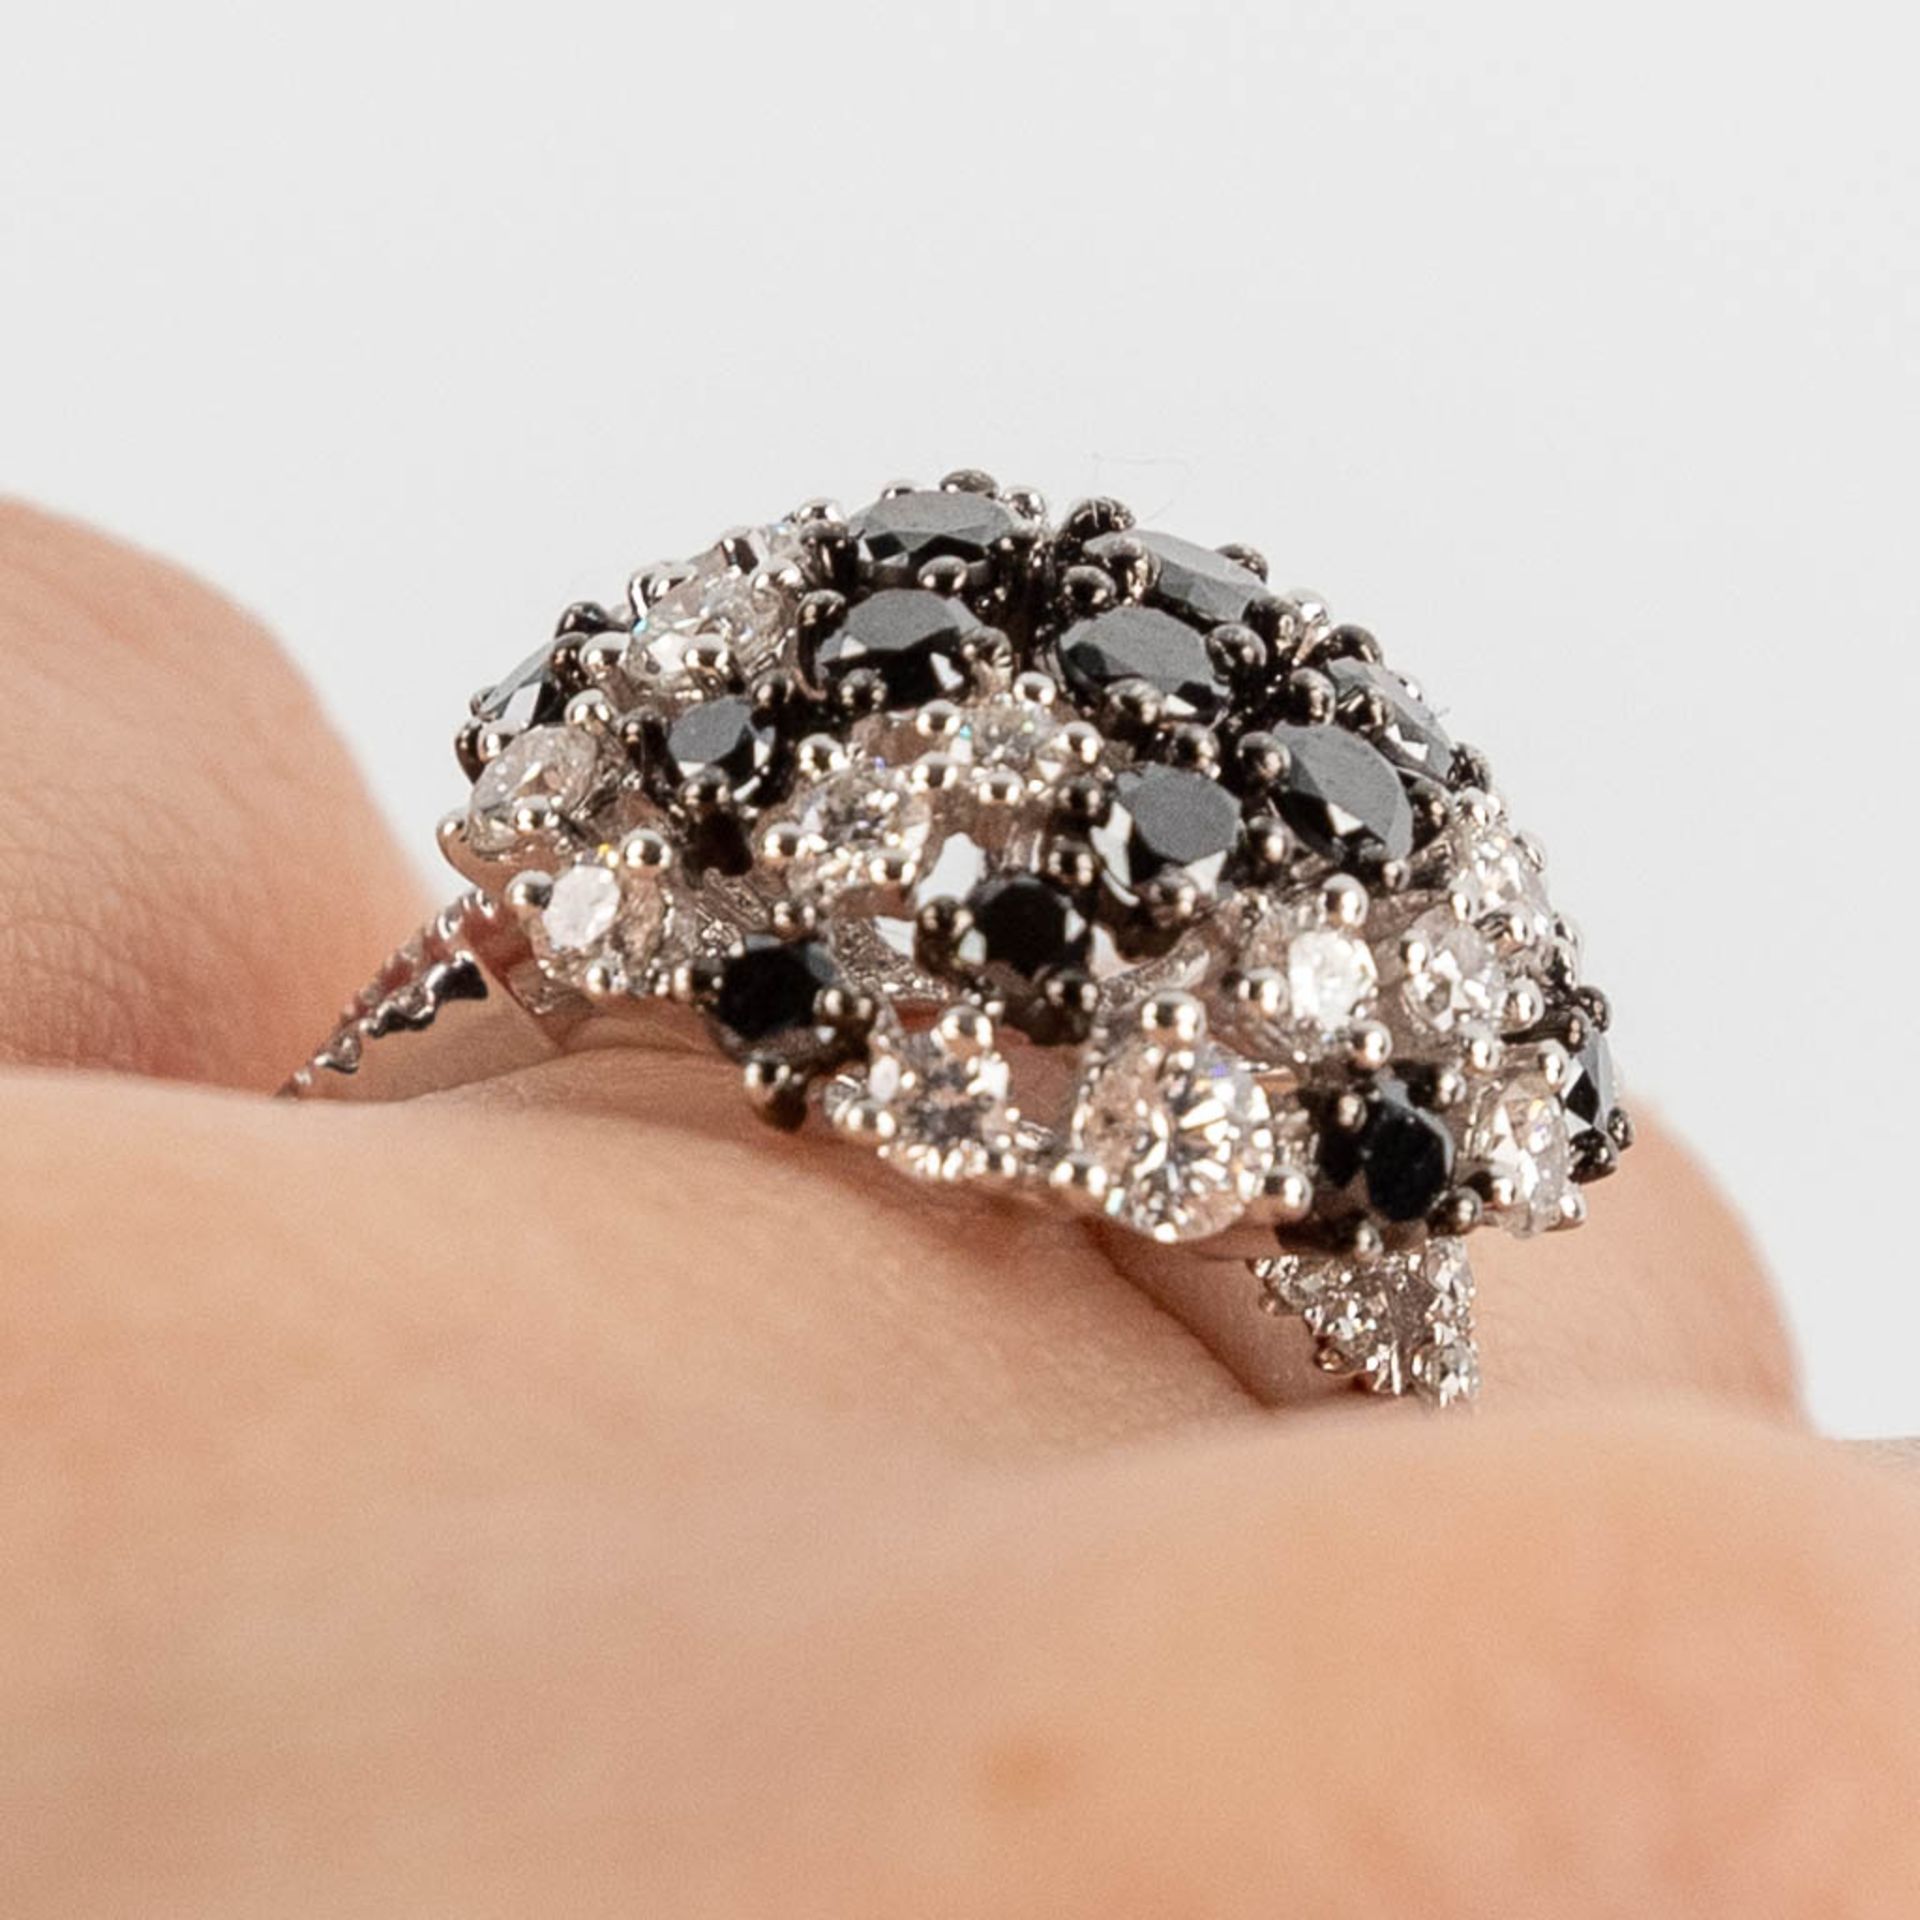 A ring, 18kt white gold with black and white diamonds, total approx. 1.81 ct. Ring size 54. - Image 9 of 10